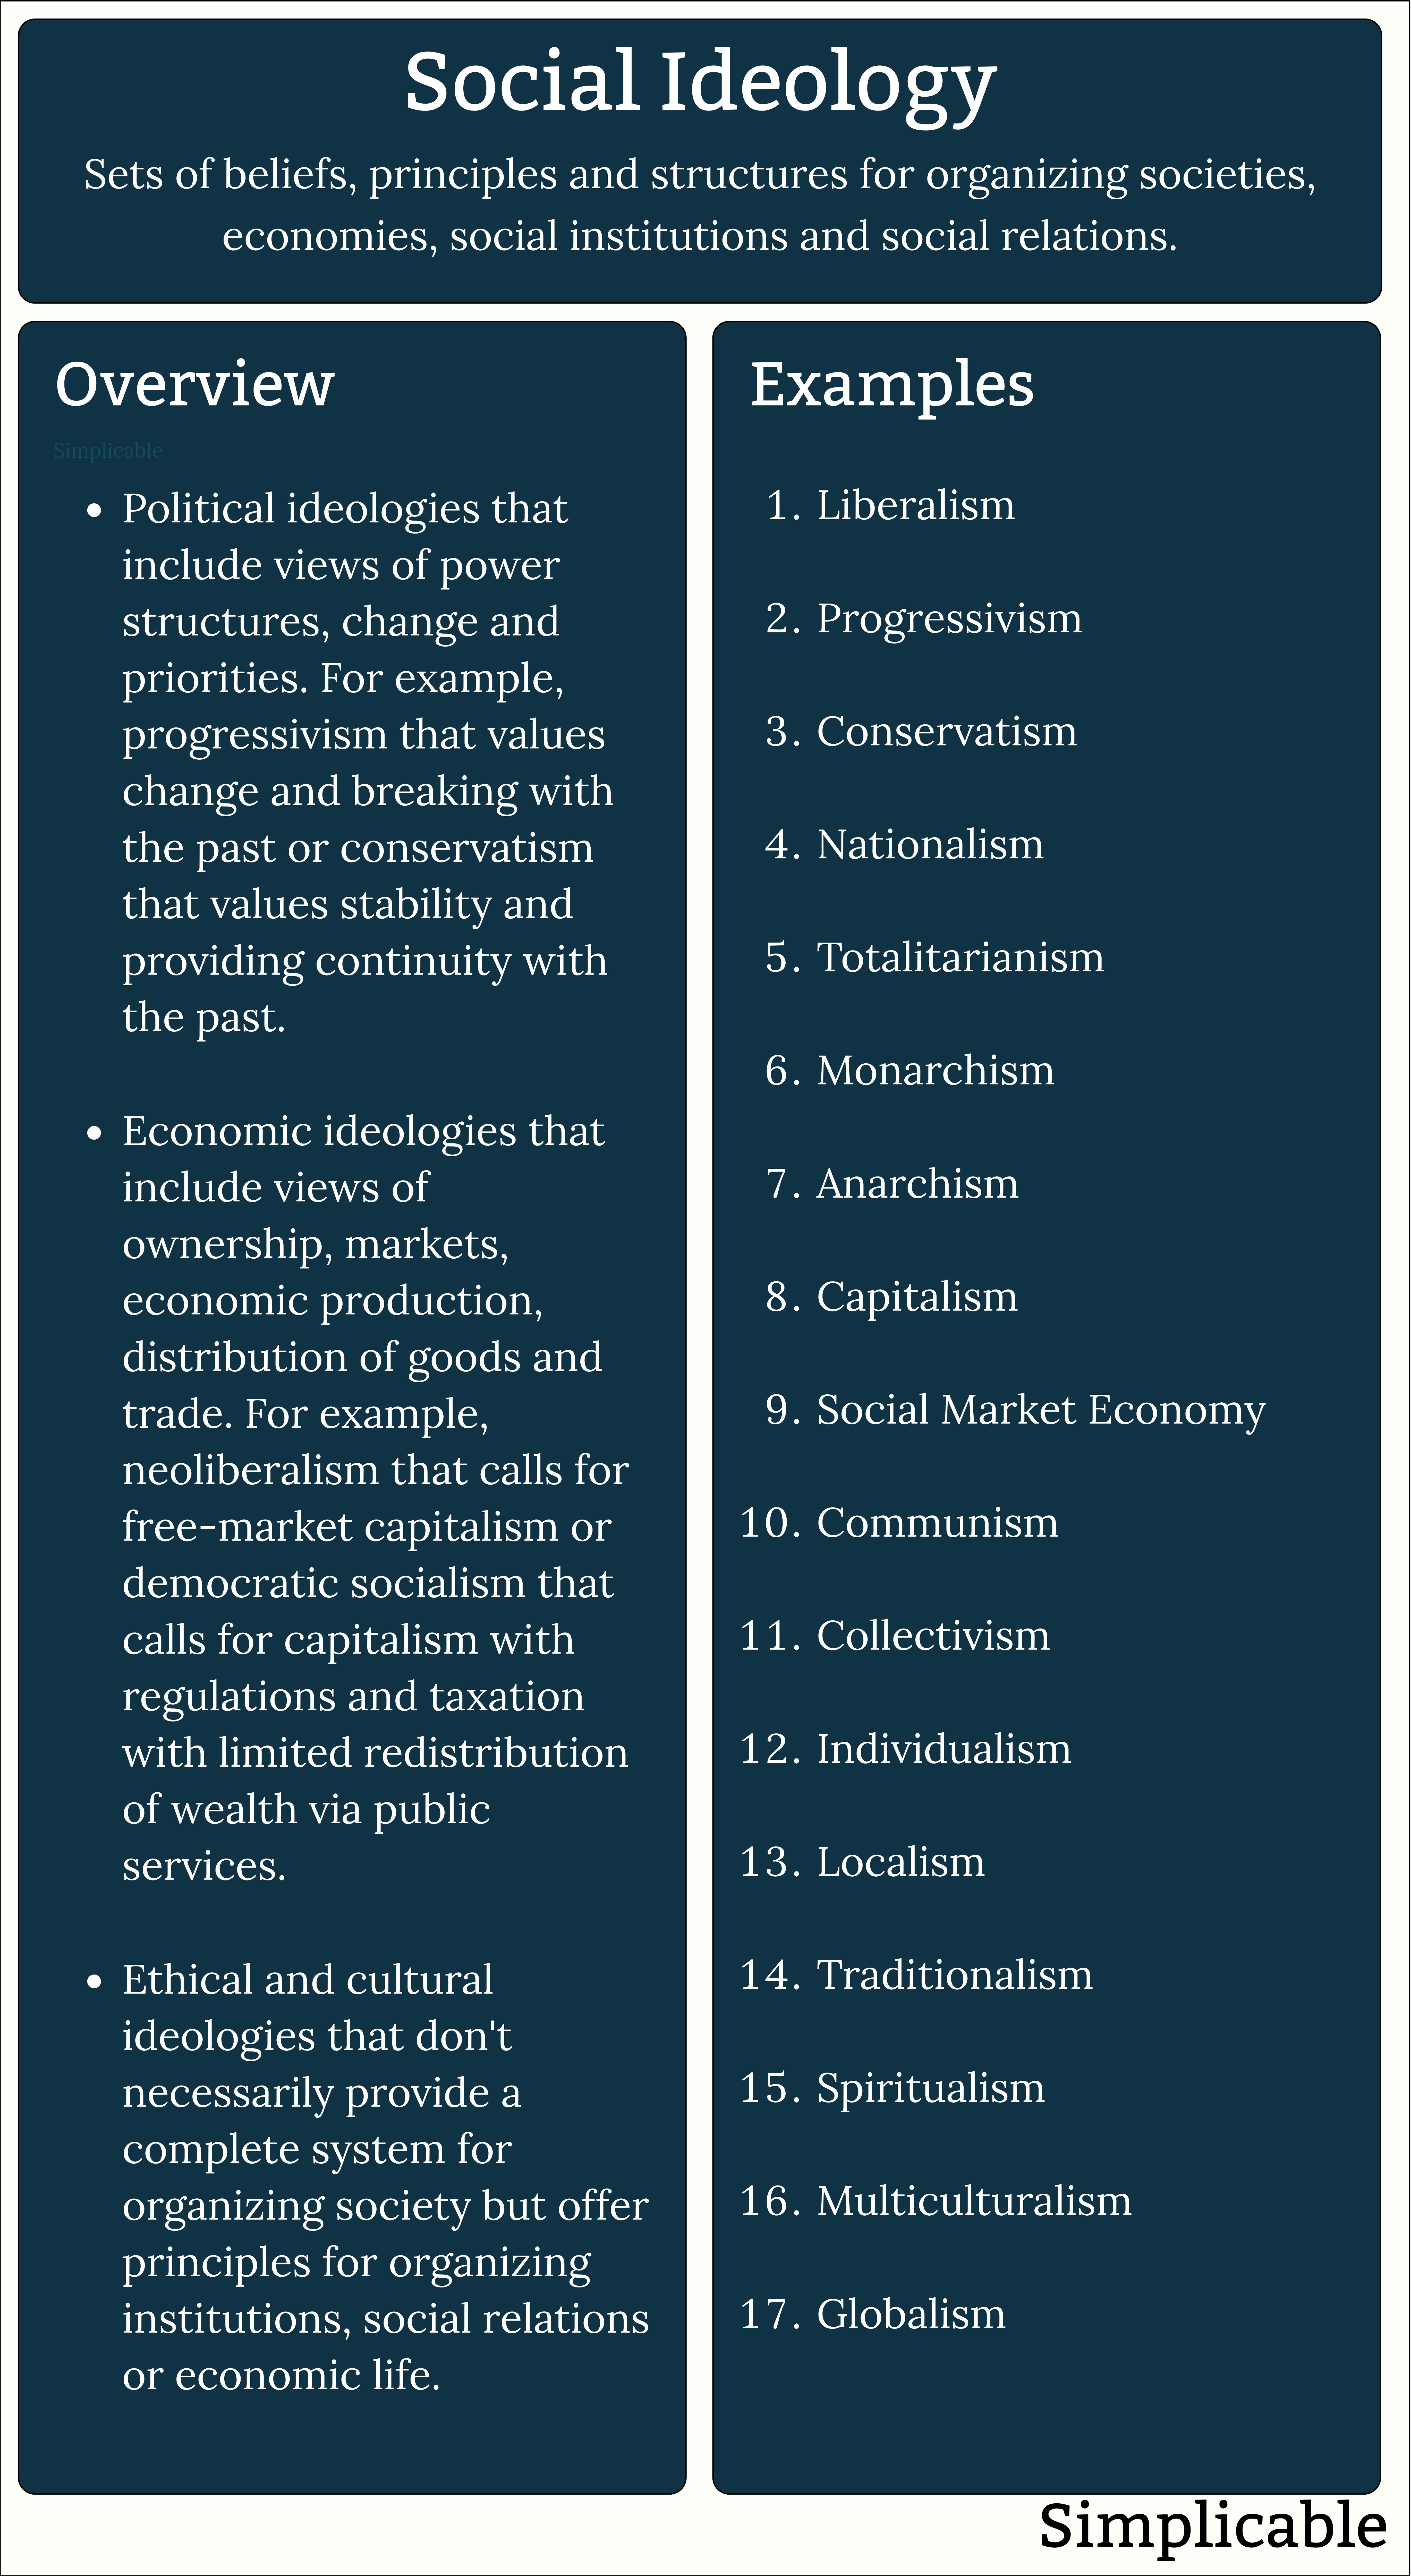 social ideology overview and examples